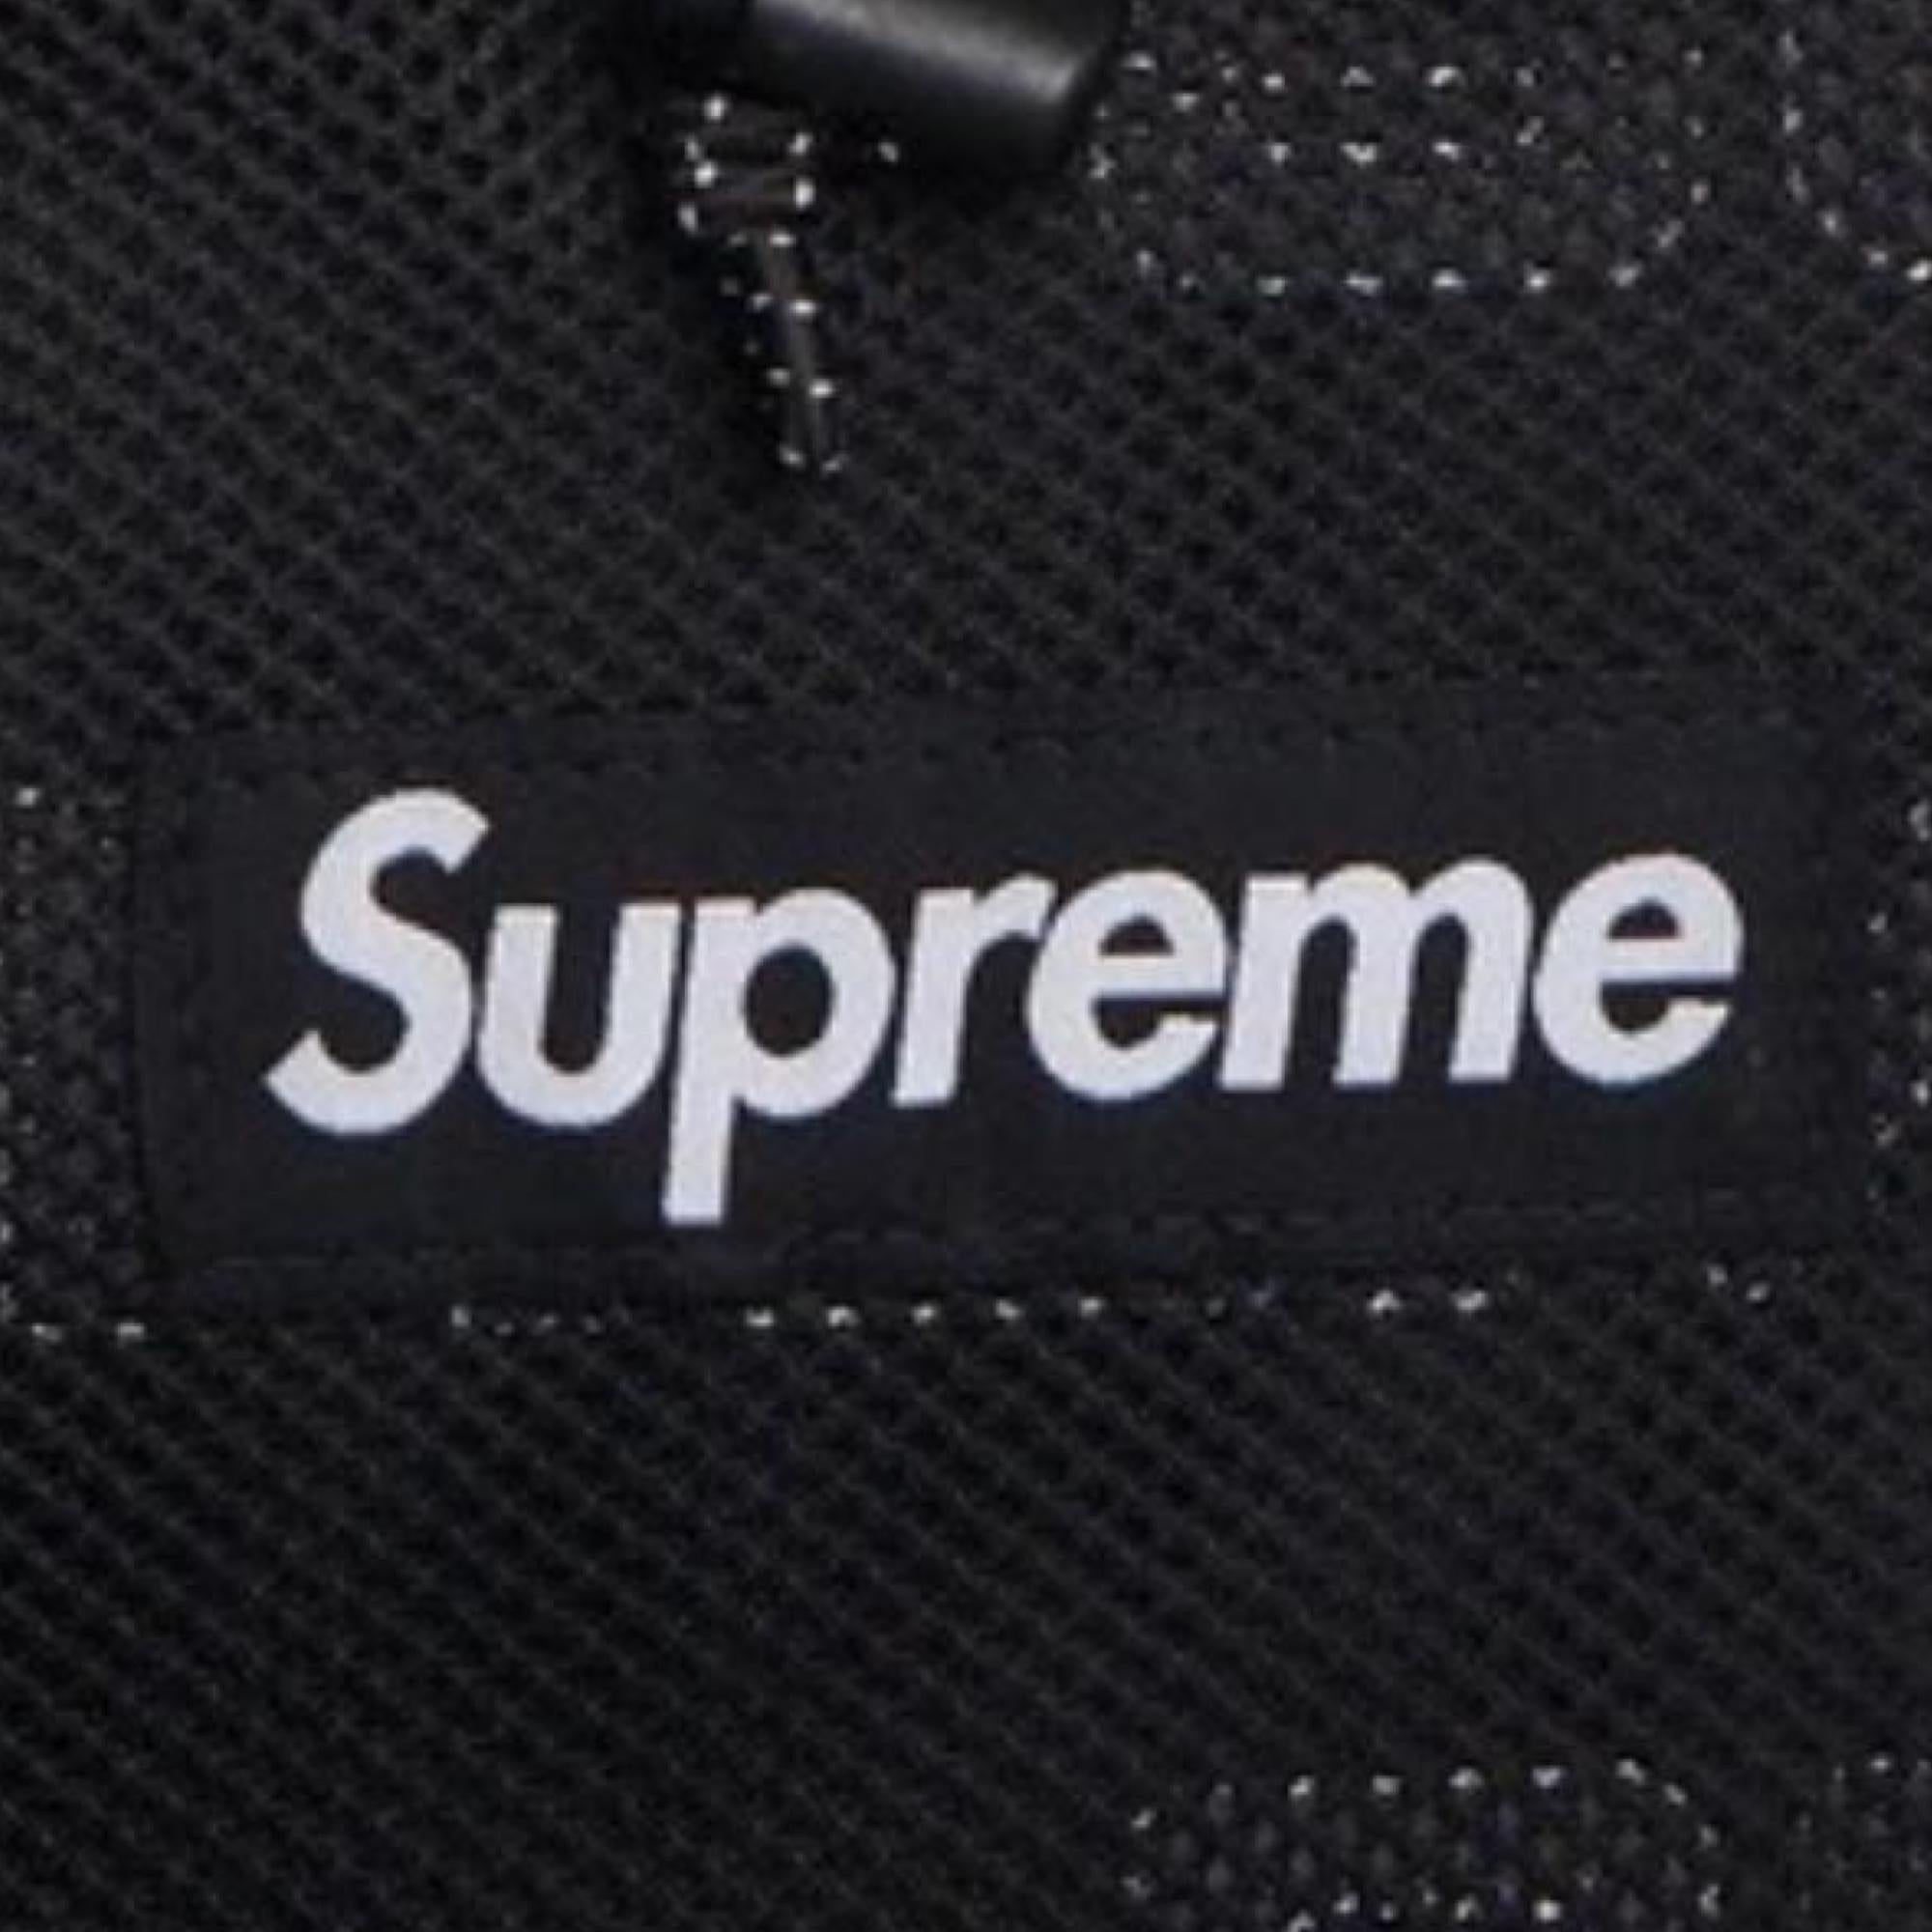 Supreme Side Bag Black In Excellent Condition For Sale In Montreal, Quebec